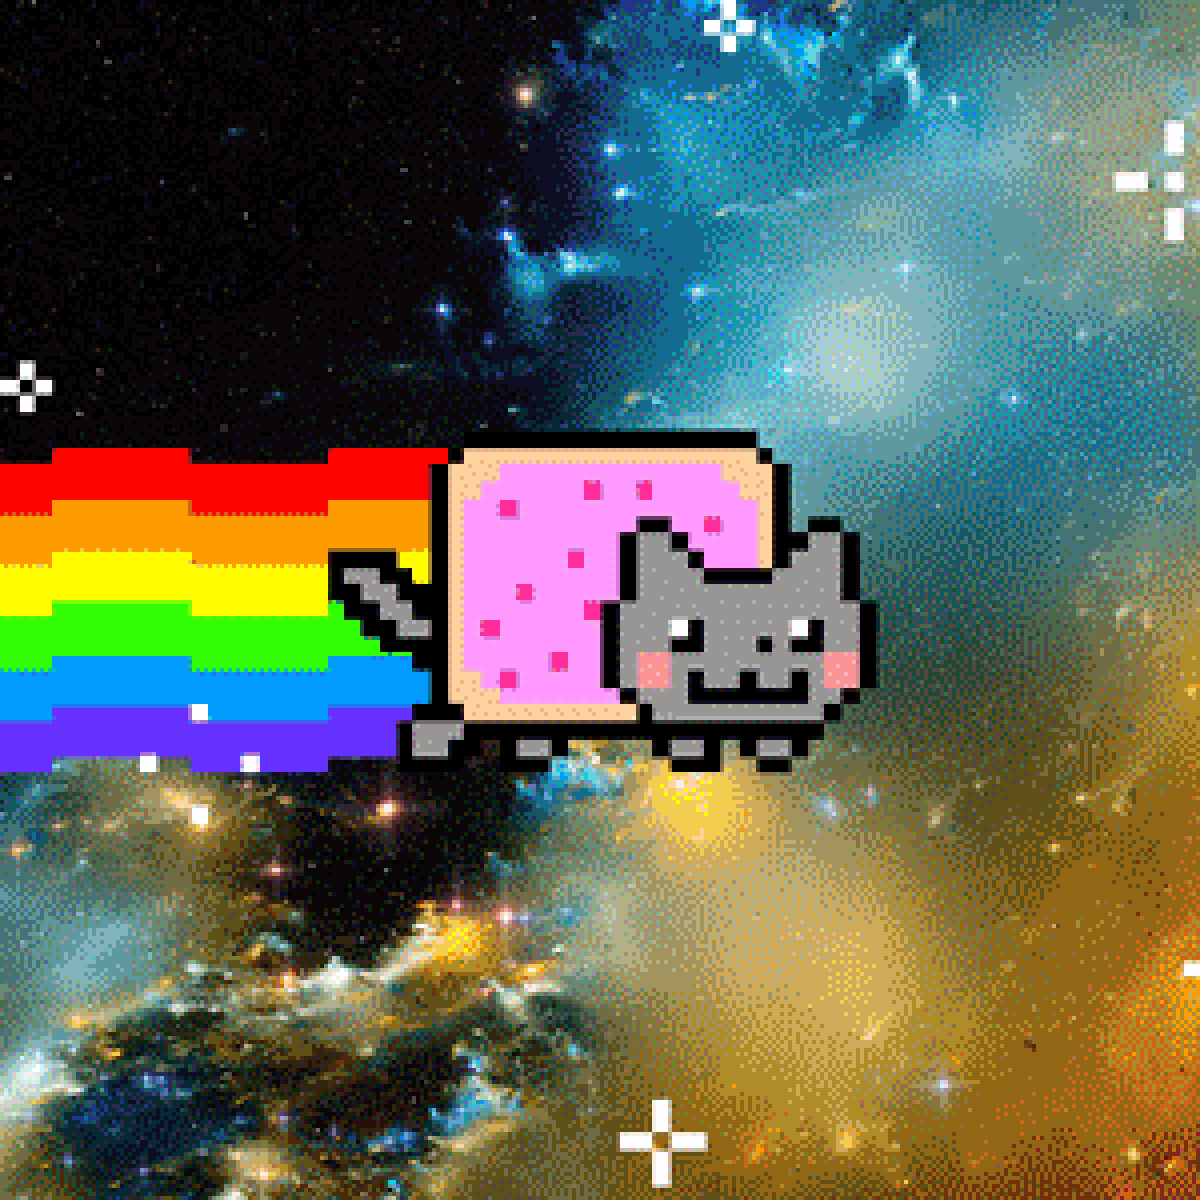 nyan cat space background